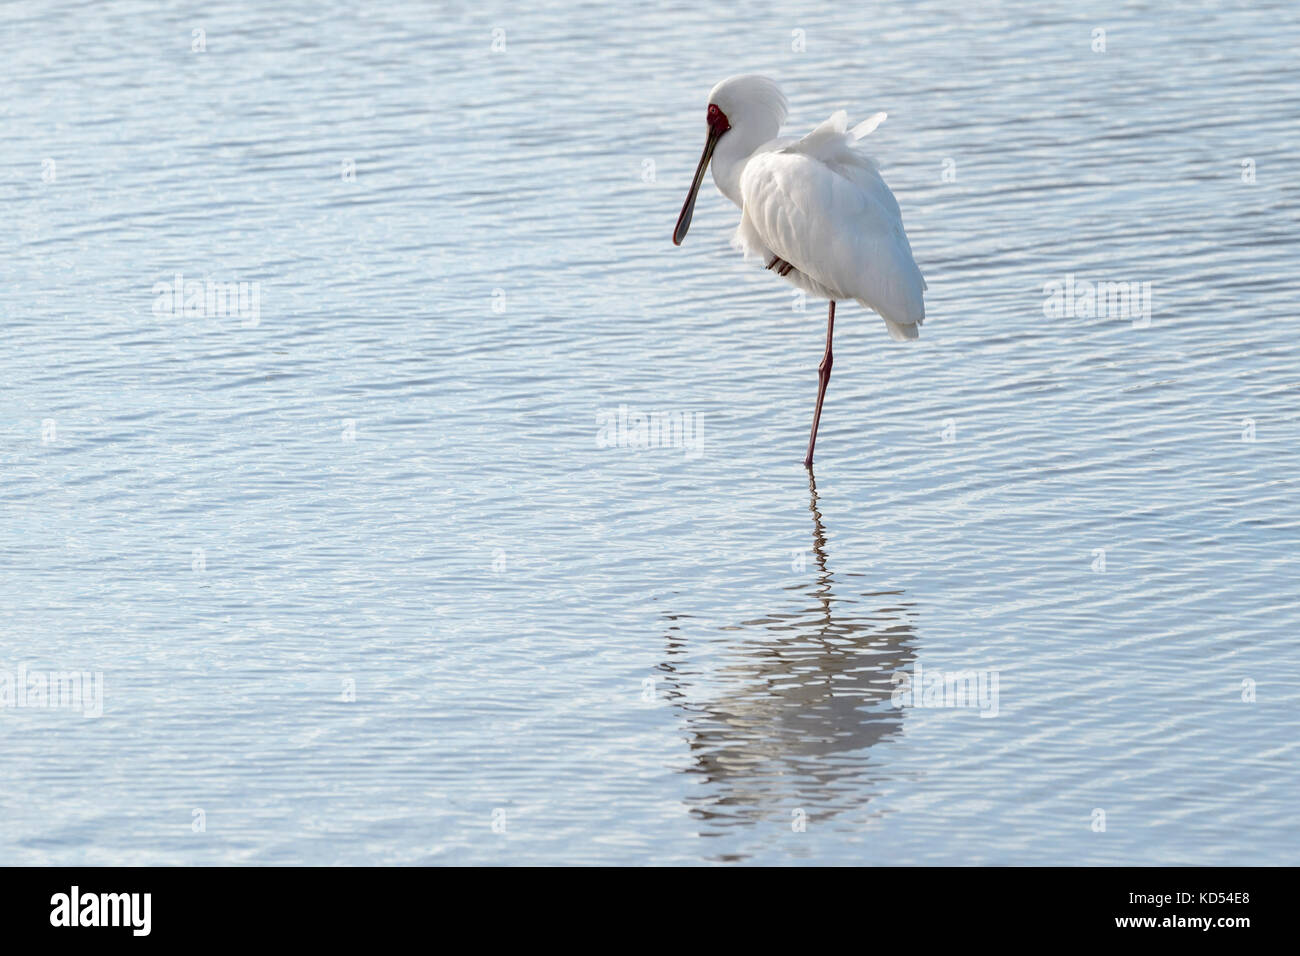 African spoonbill (Platalea alba) standing in water with reflection, Kruger National Park, South Africa. Stock Photo